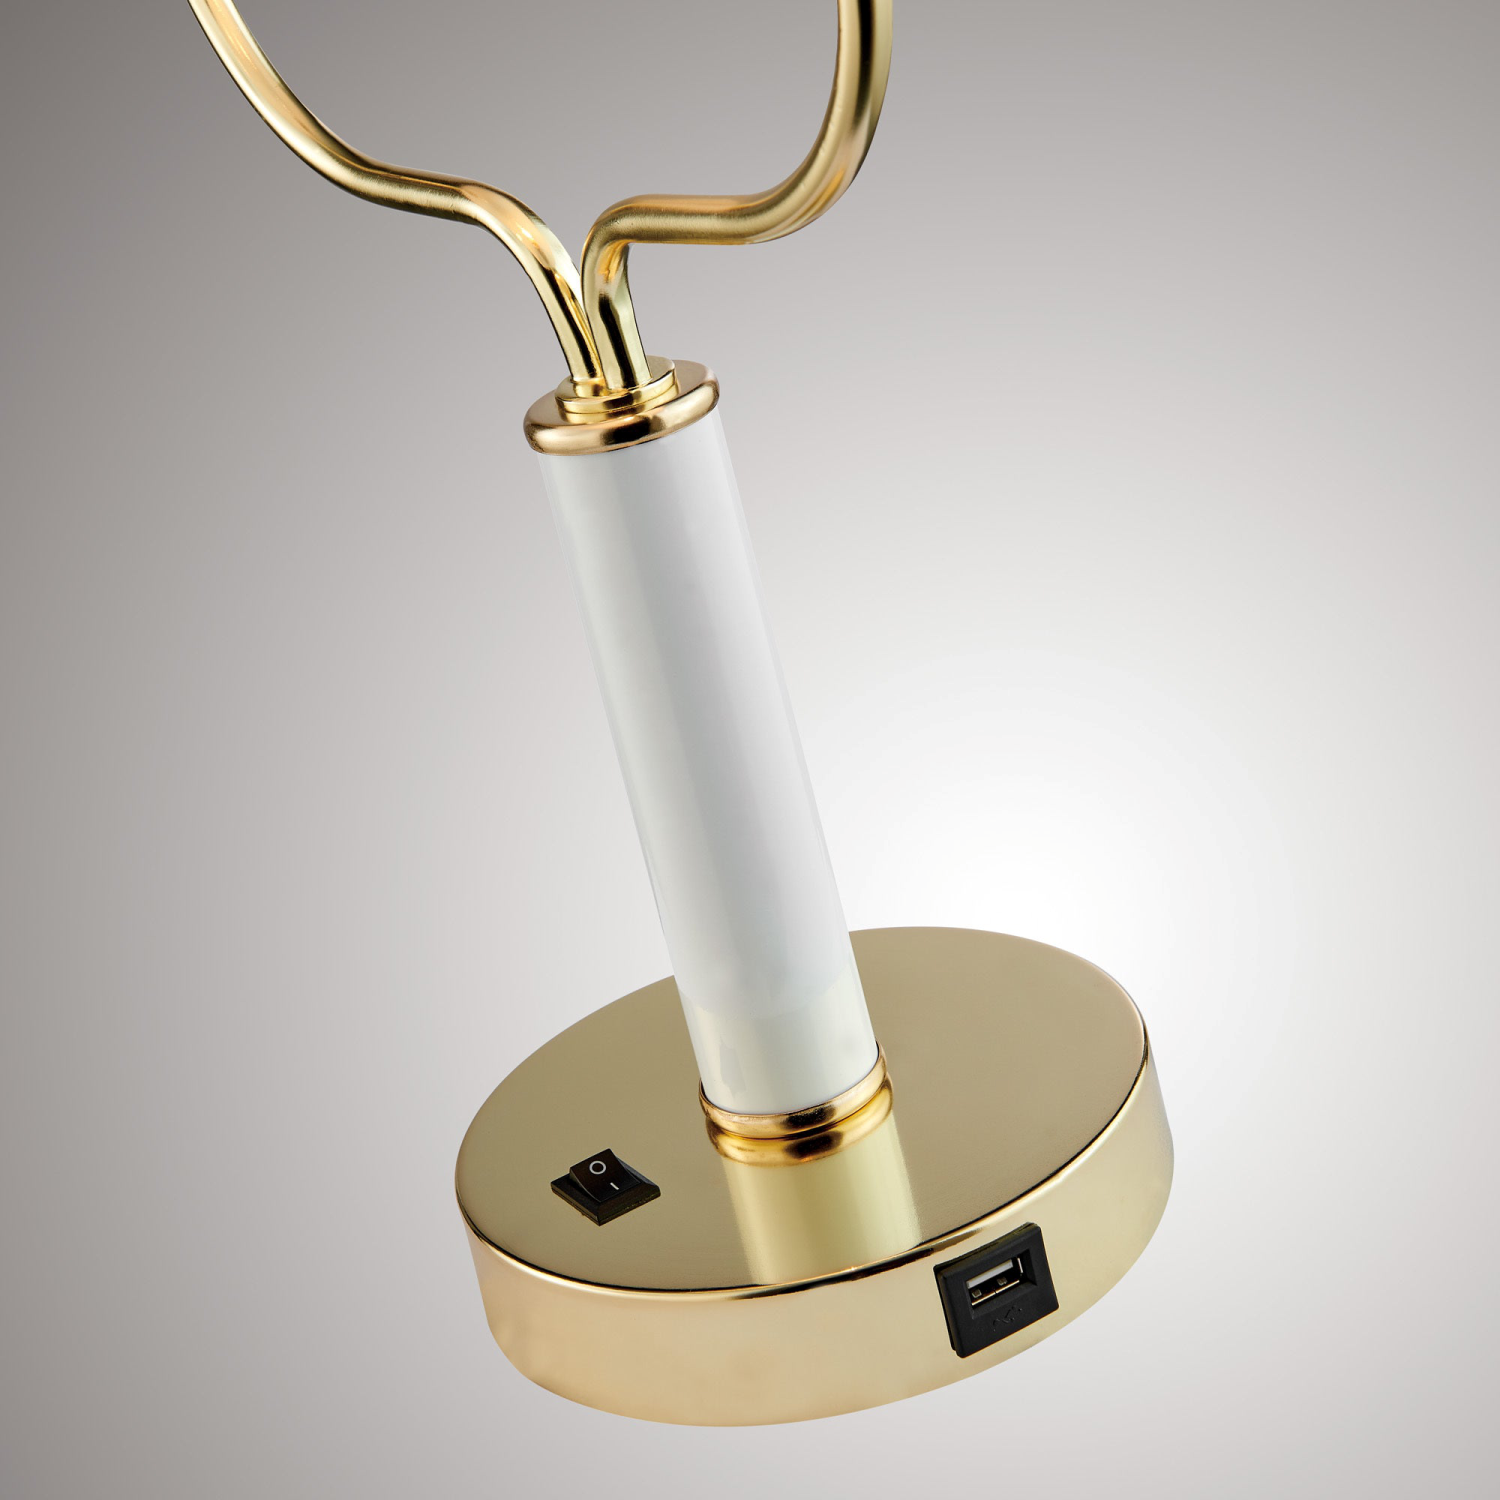 Yanni Desk Lamp Close Up of Base with Light Switch and USB Port